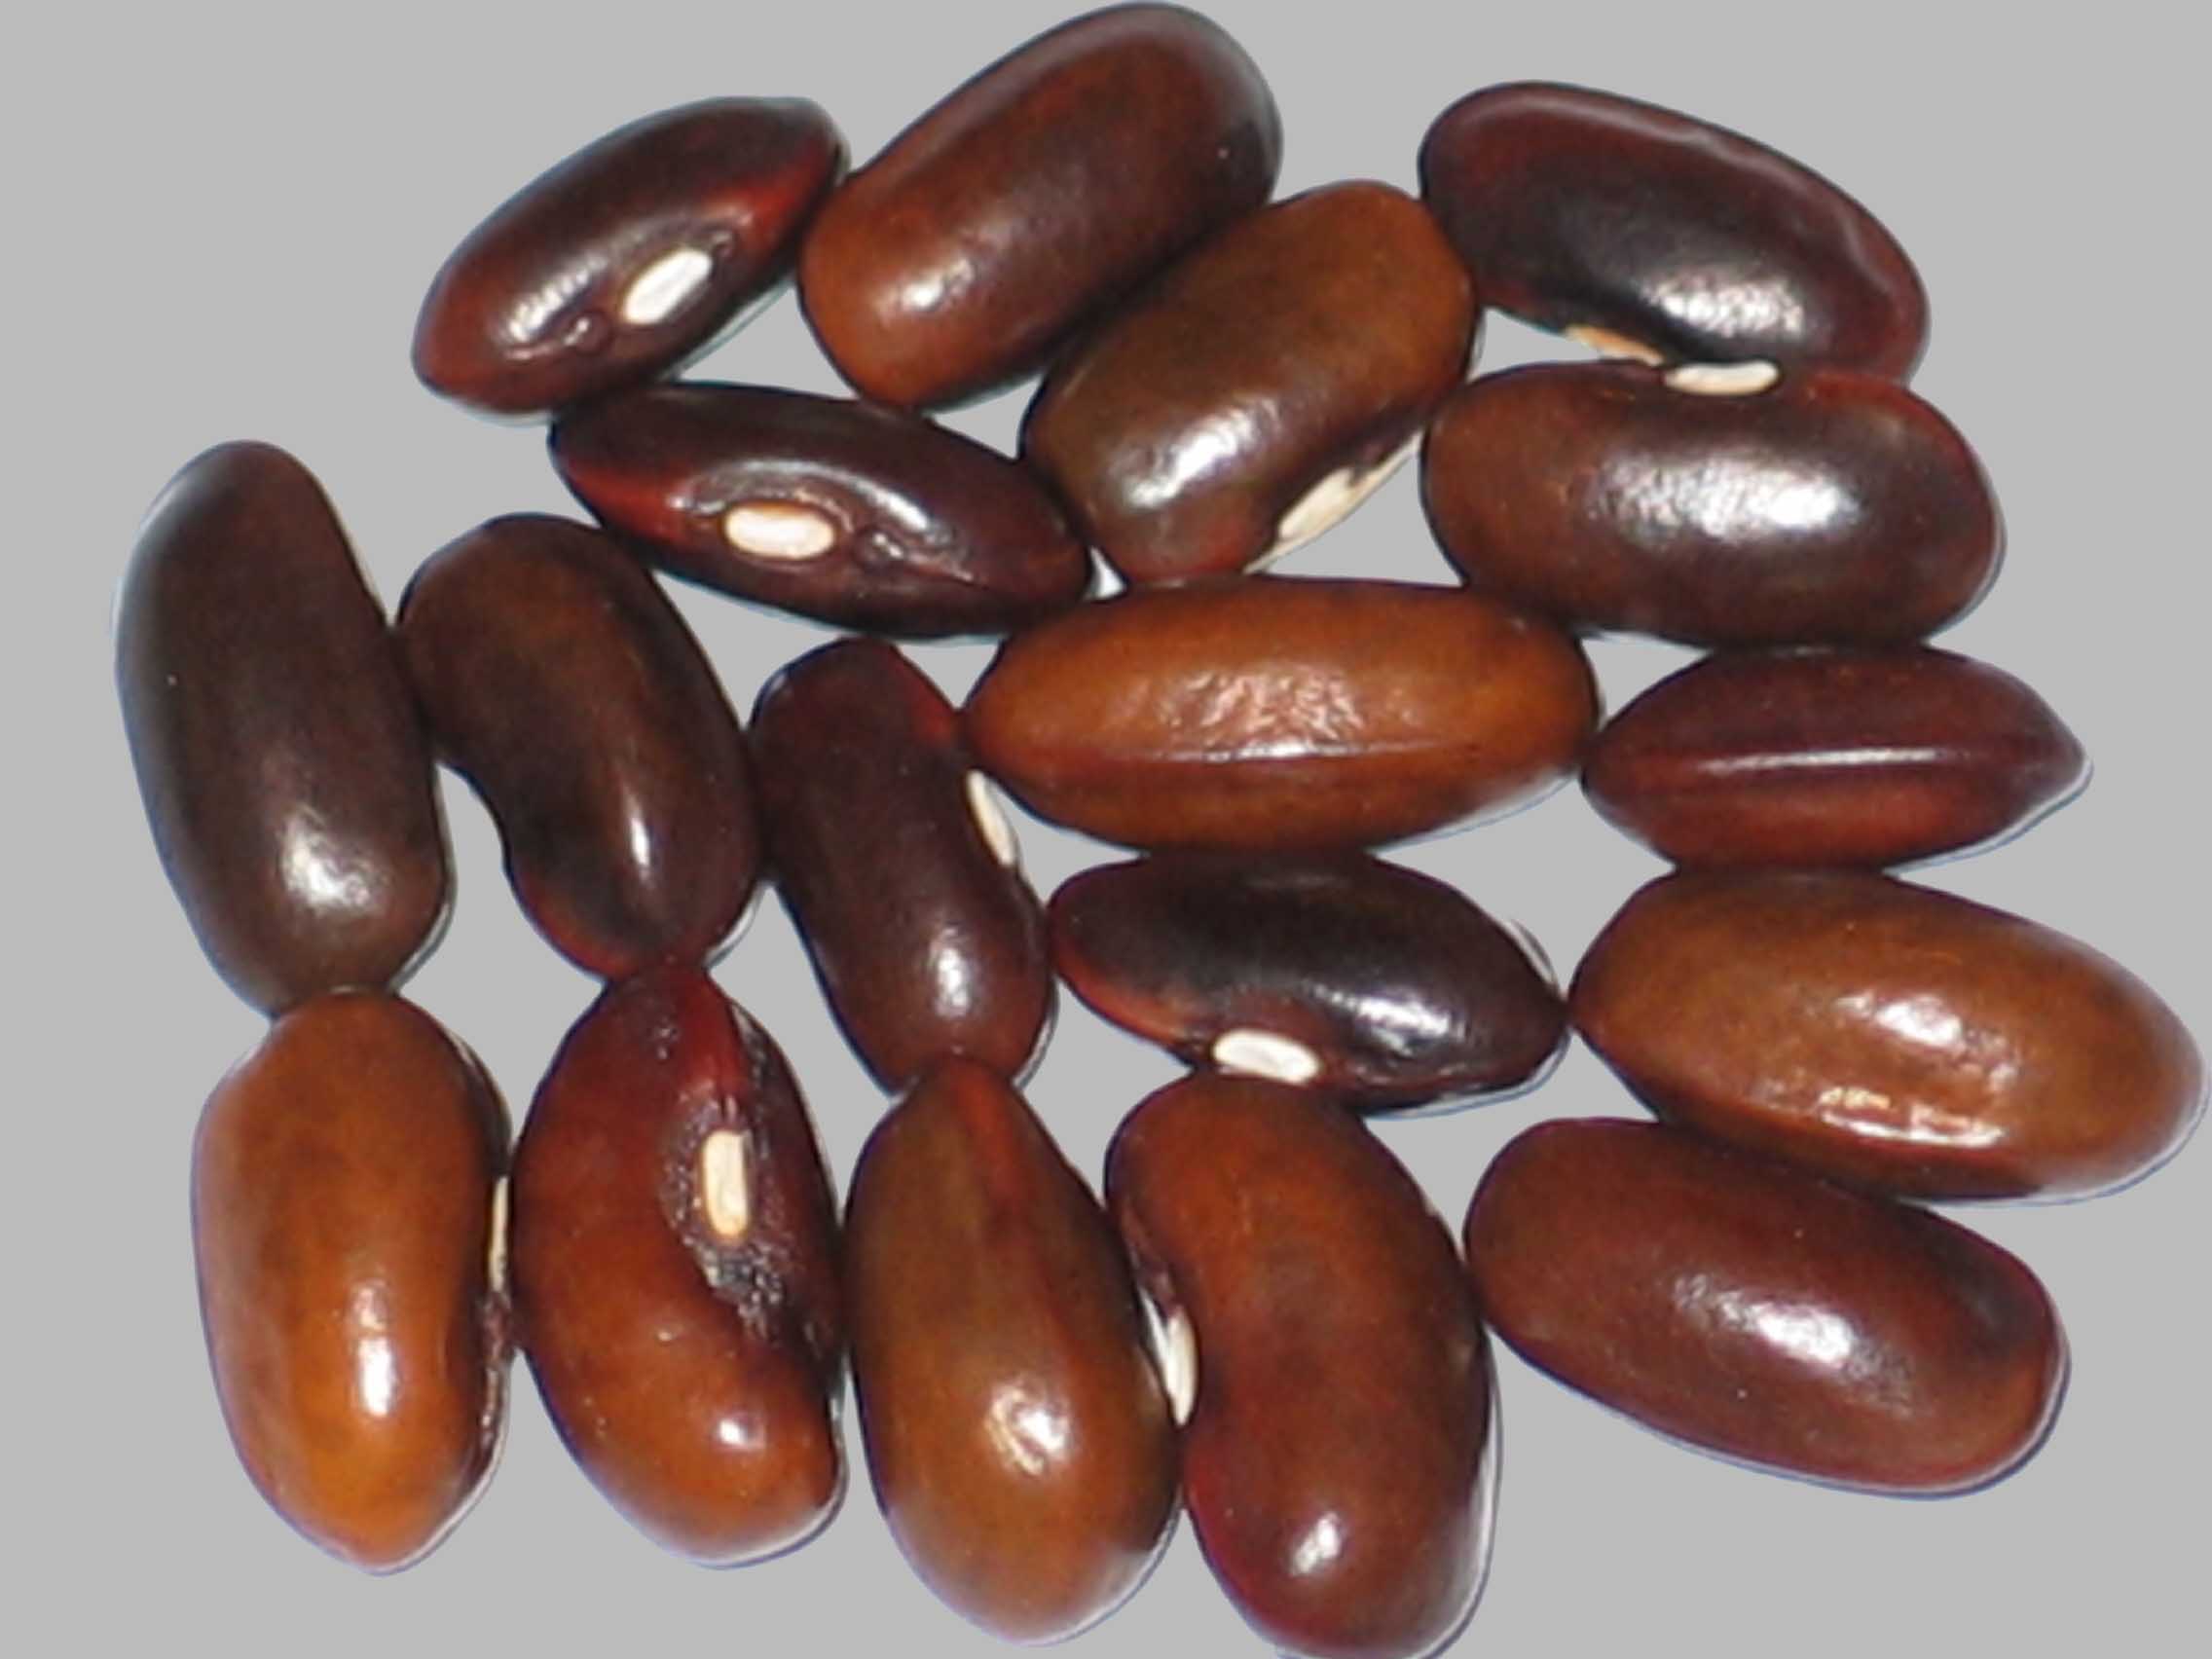 image of Idelight beans